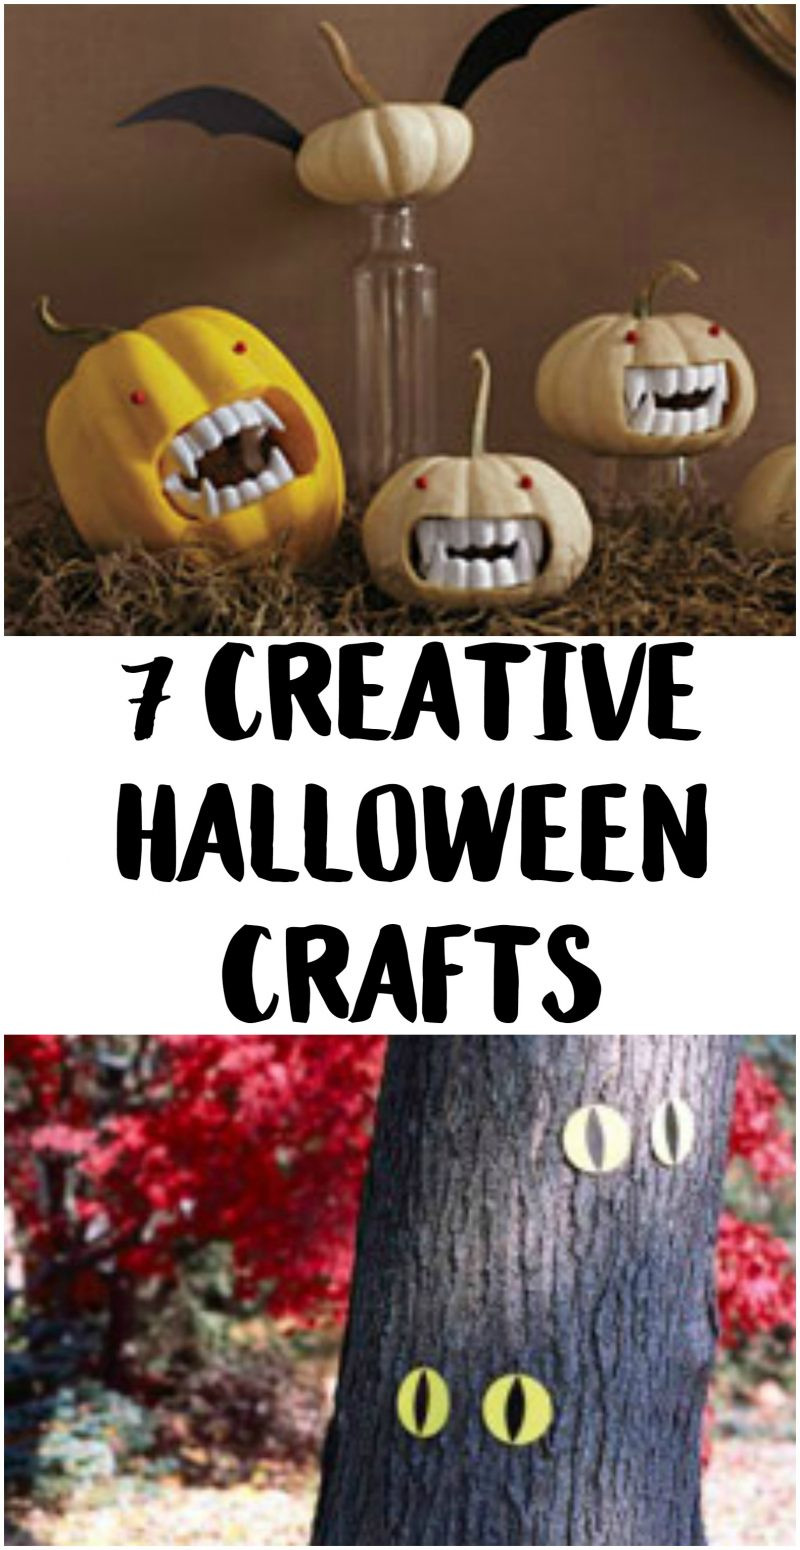 Creative Craft Ideas For Adults
 4 Easy No Carve Glow in the Dark Pumpkin Decorating Ideas